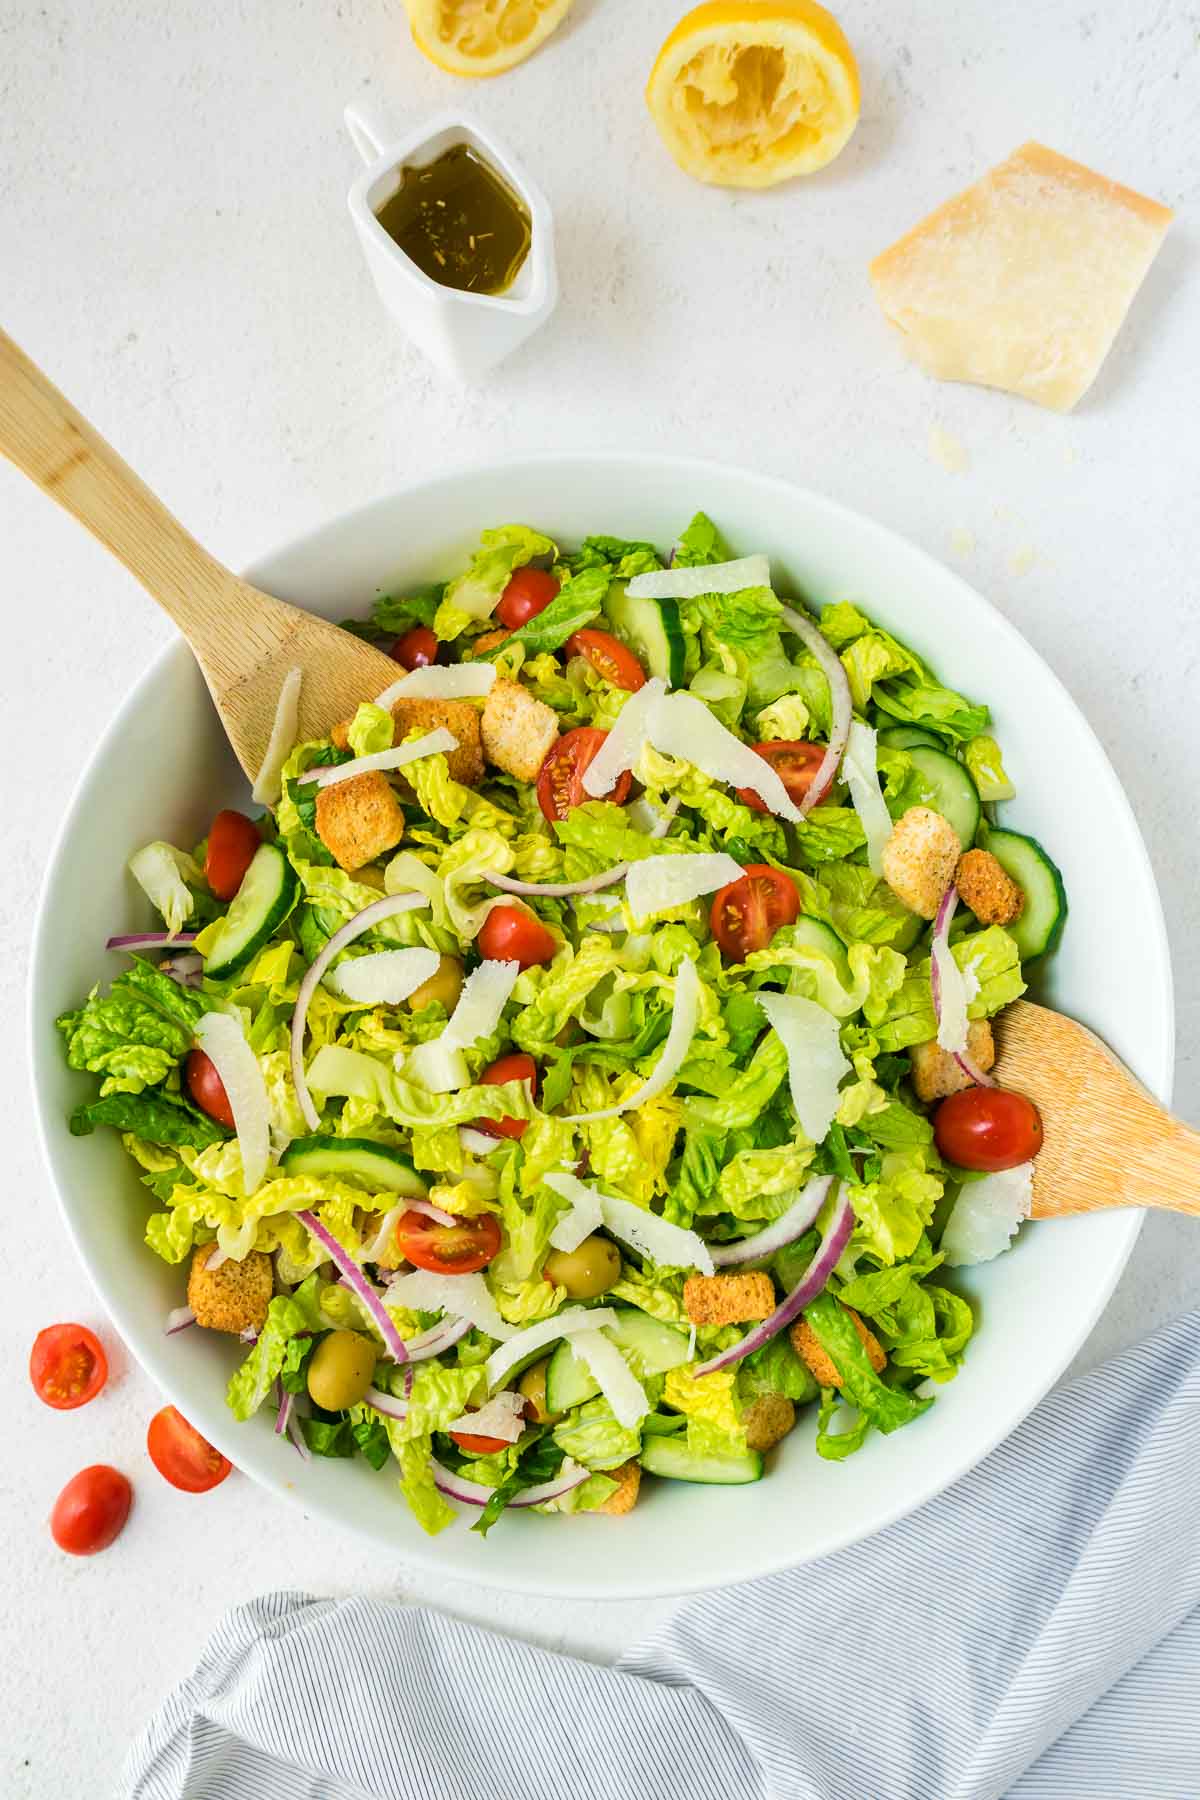 Large tossed green salad in a white serving bowl with two wooden serving spoons.